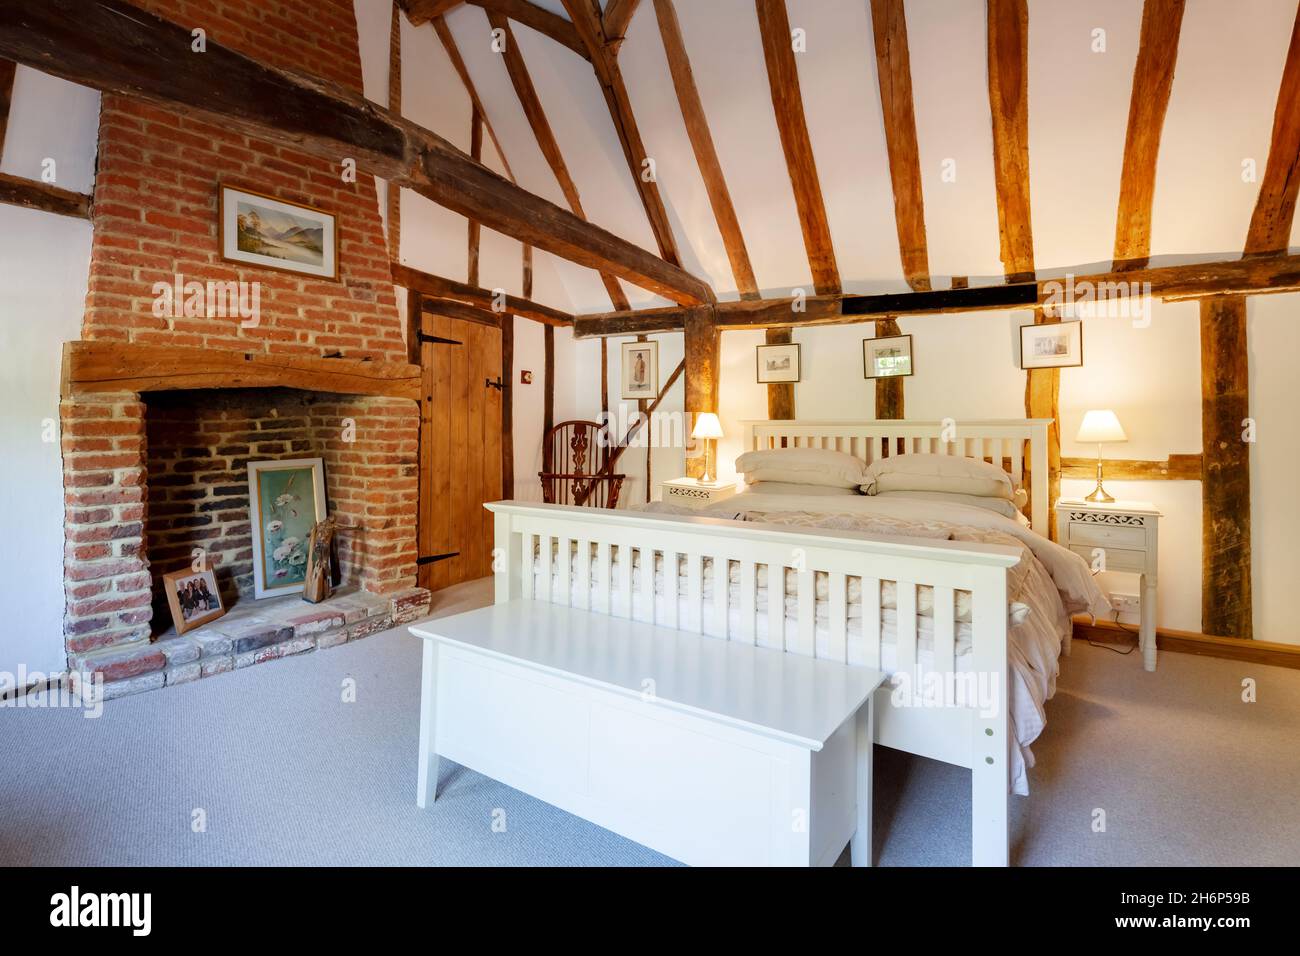 Stoke By Clare, England October 17 2019: Bedroom interior inside traditional english cottage with exposed brickwork and beams, inglenook fireplace and Stock Photo